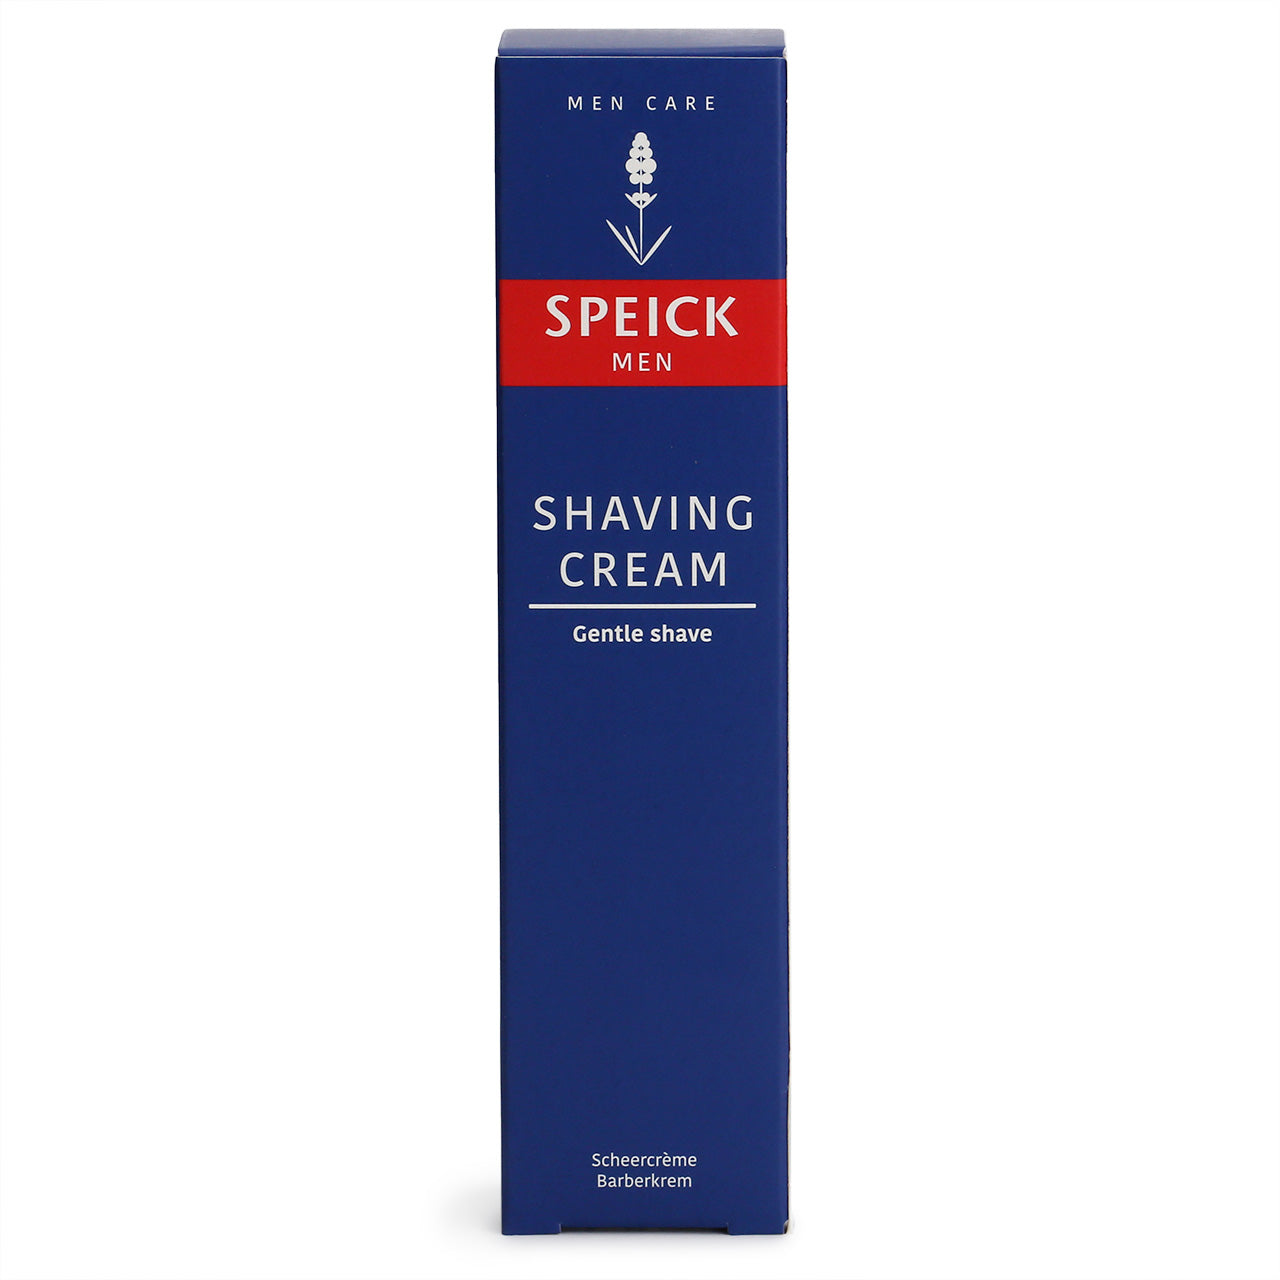 Speick Men Shaving Cream in a bright blue and red tube